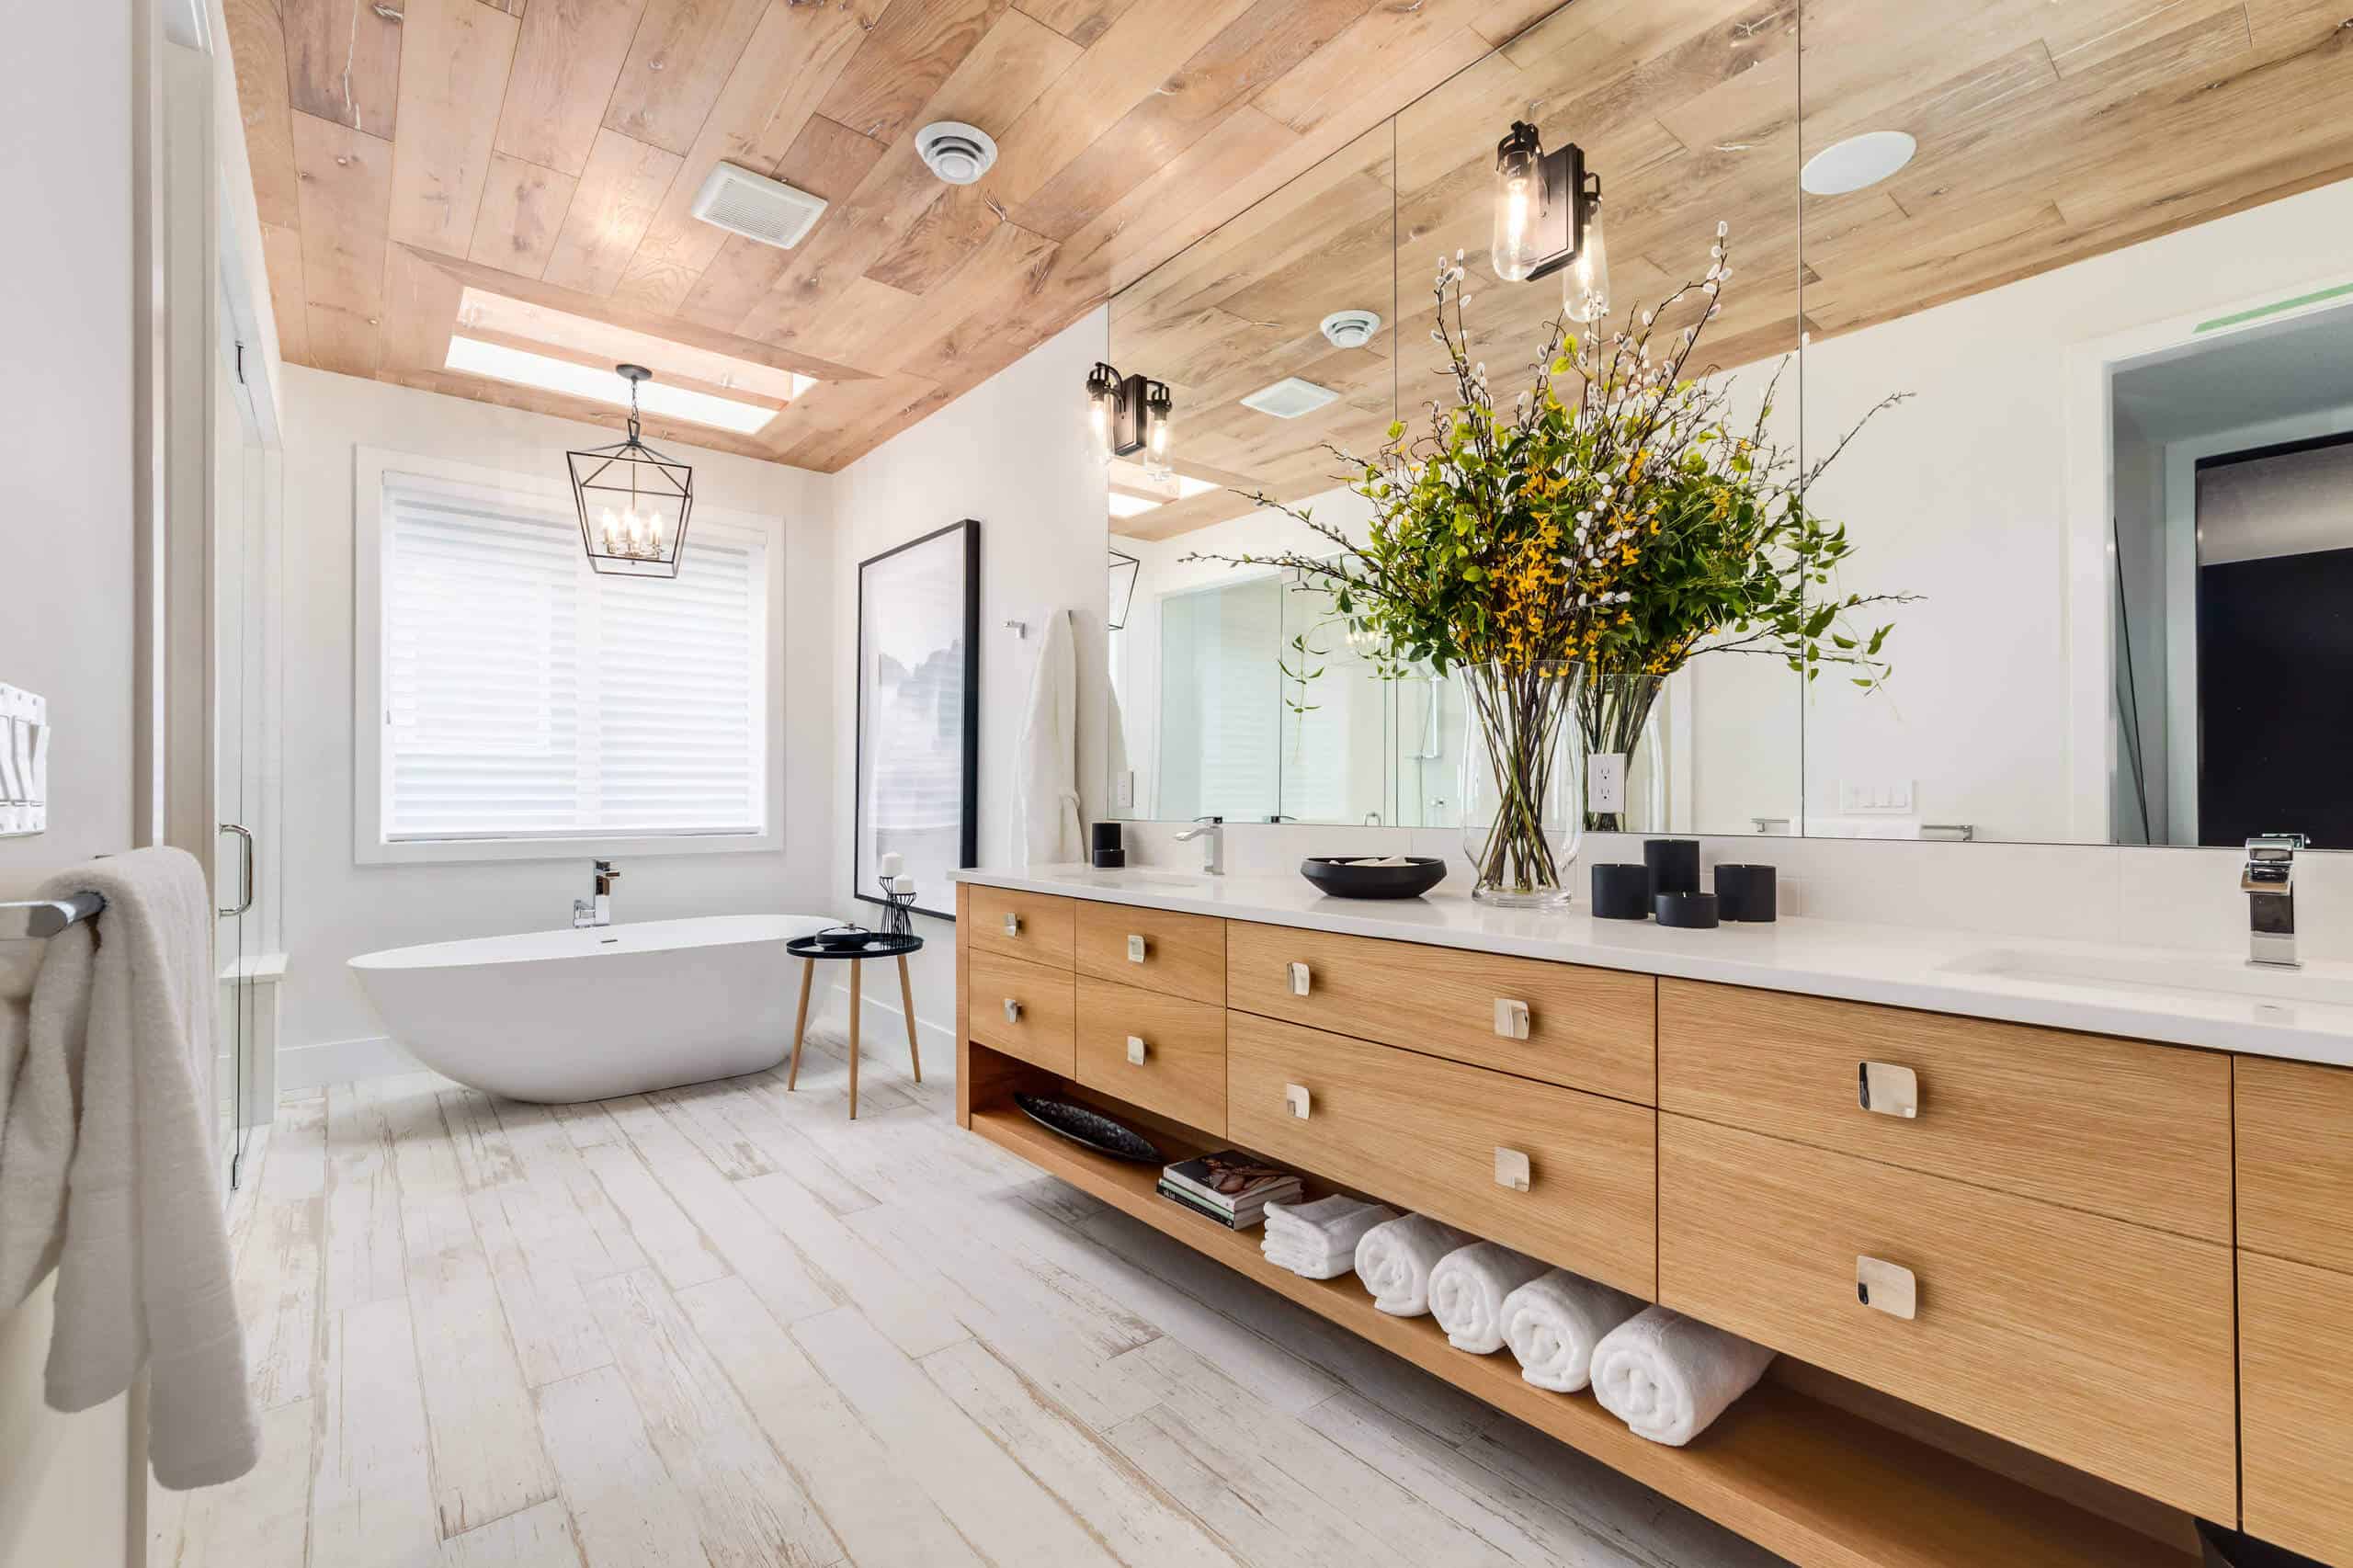 Can Laminate Flooring Be Installed In A, What Do You Put Under Laminate Flooring In A Bathroom